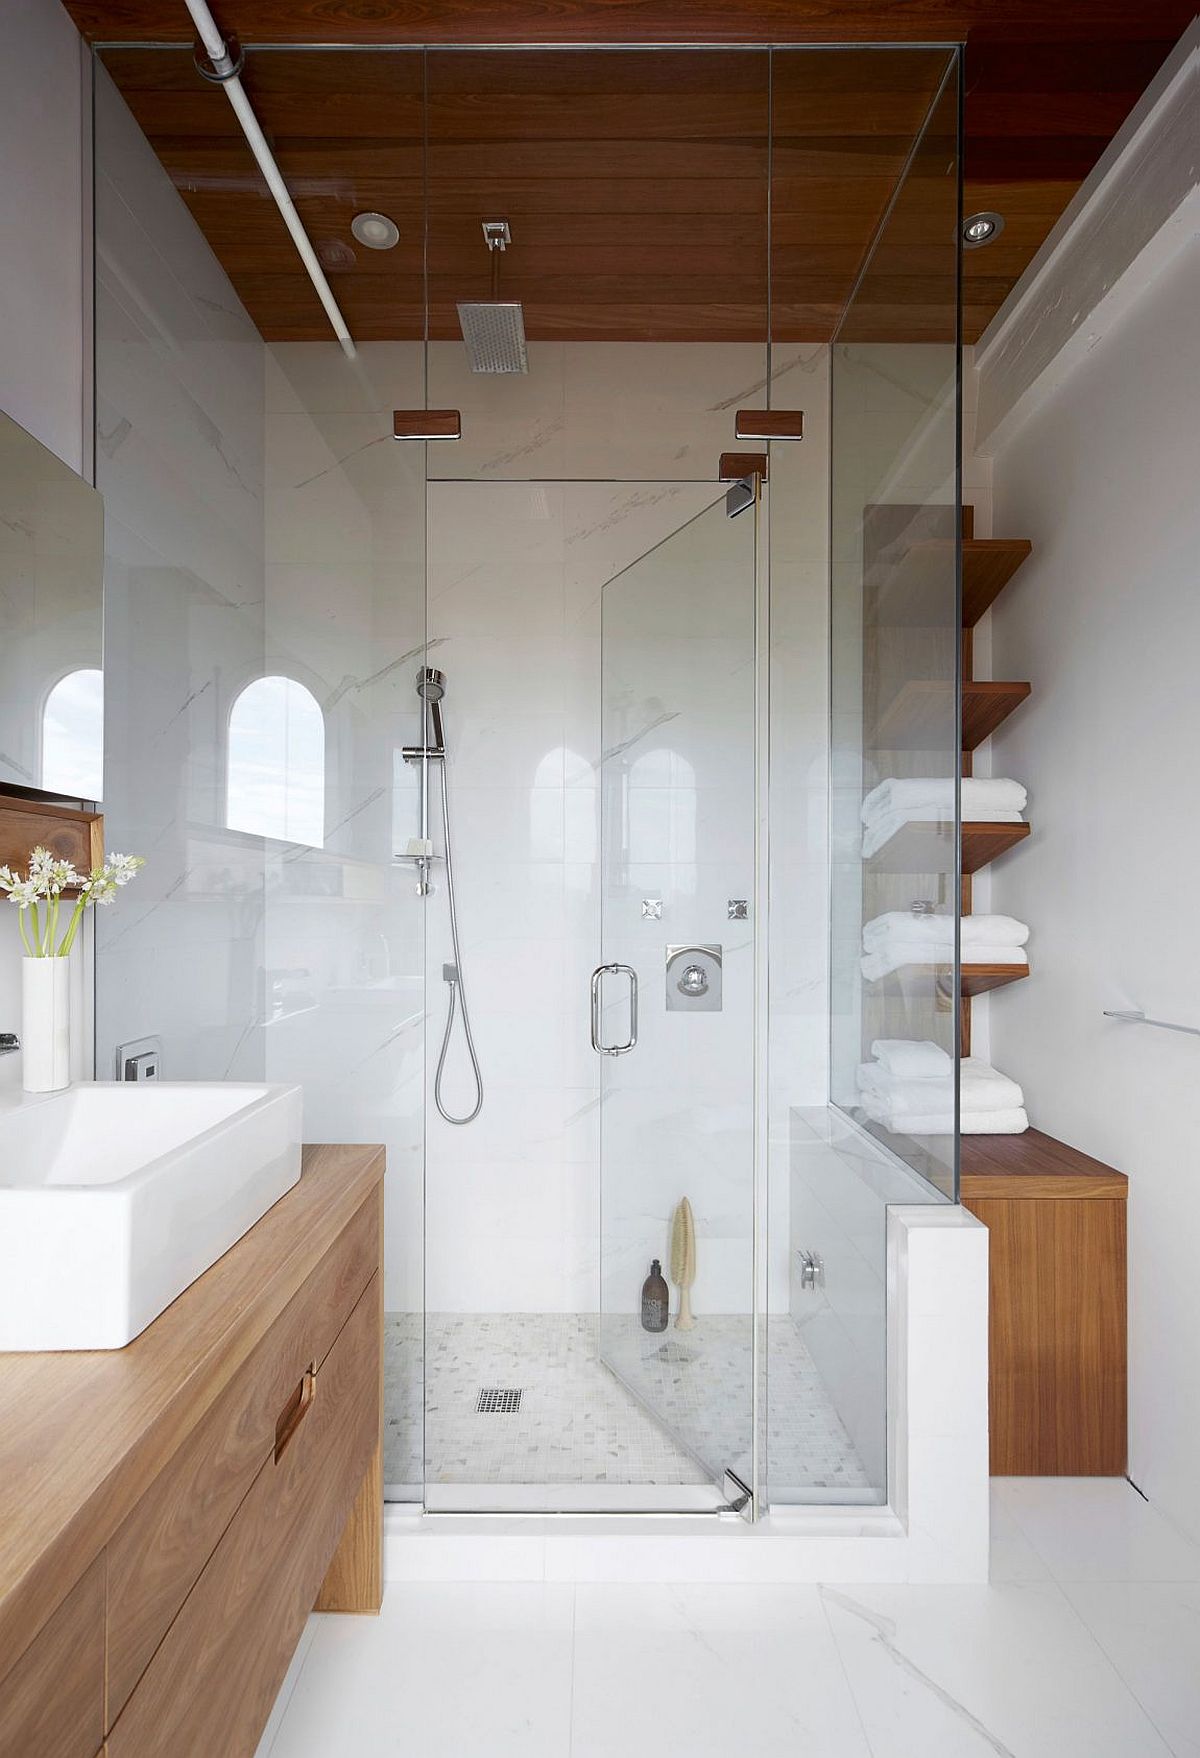 Small glass shower area of the modern bathroom